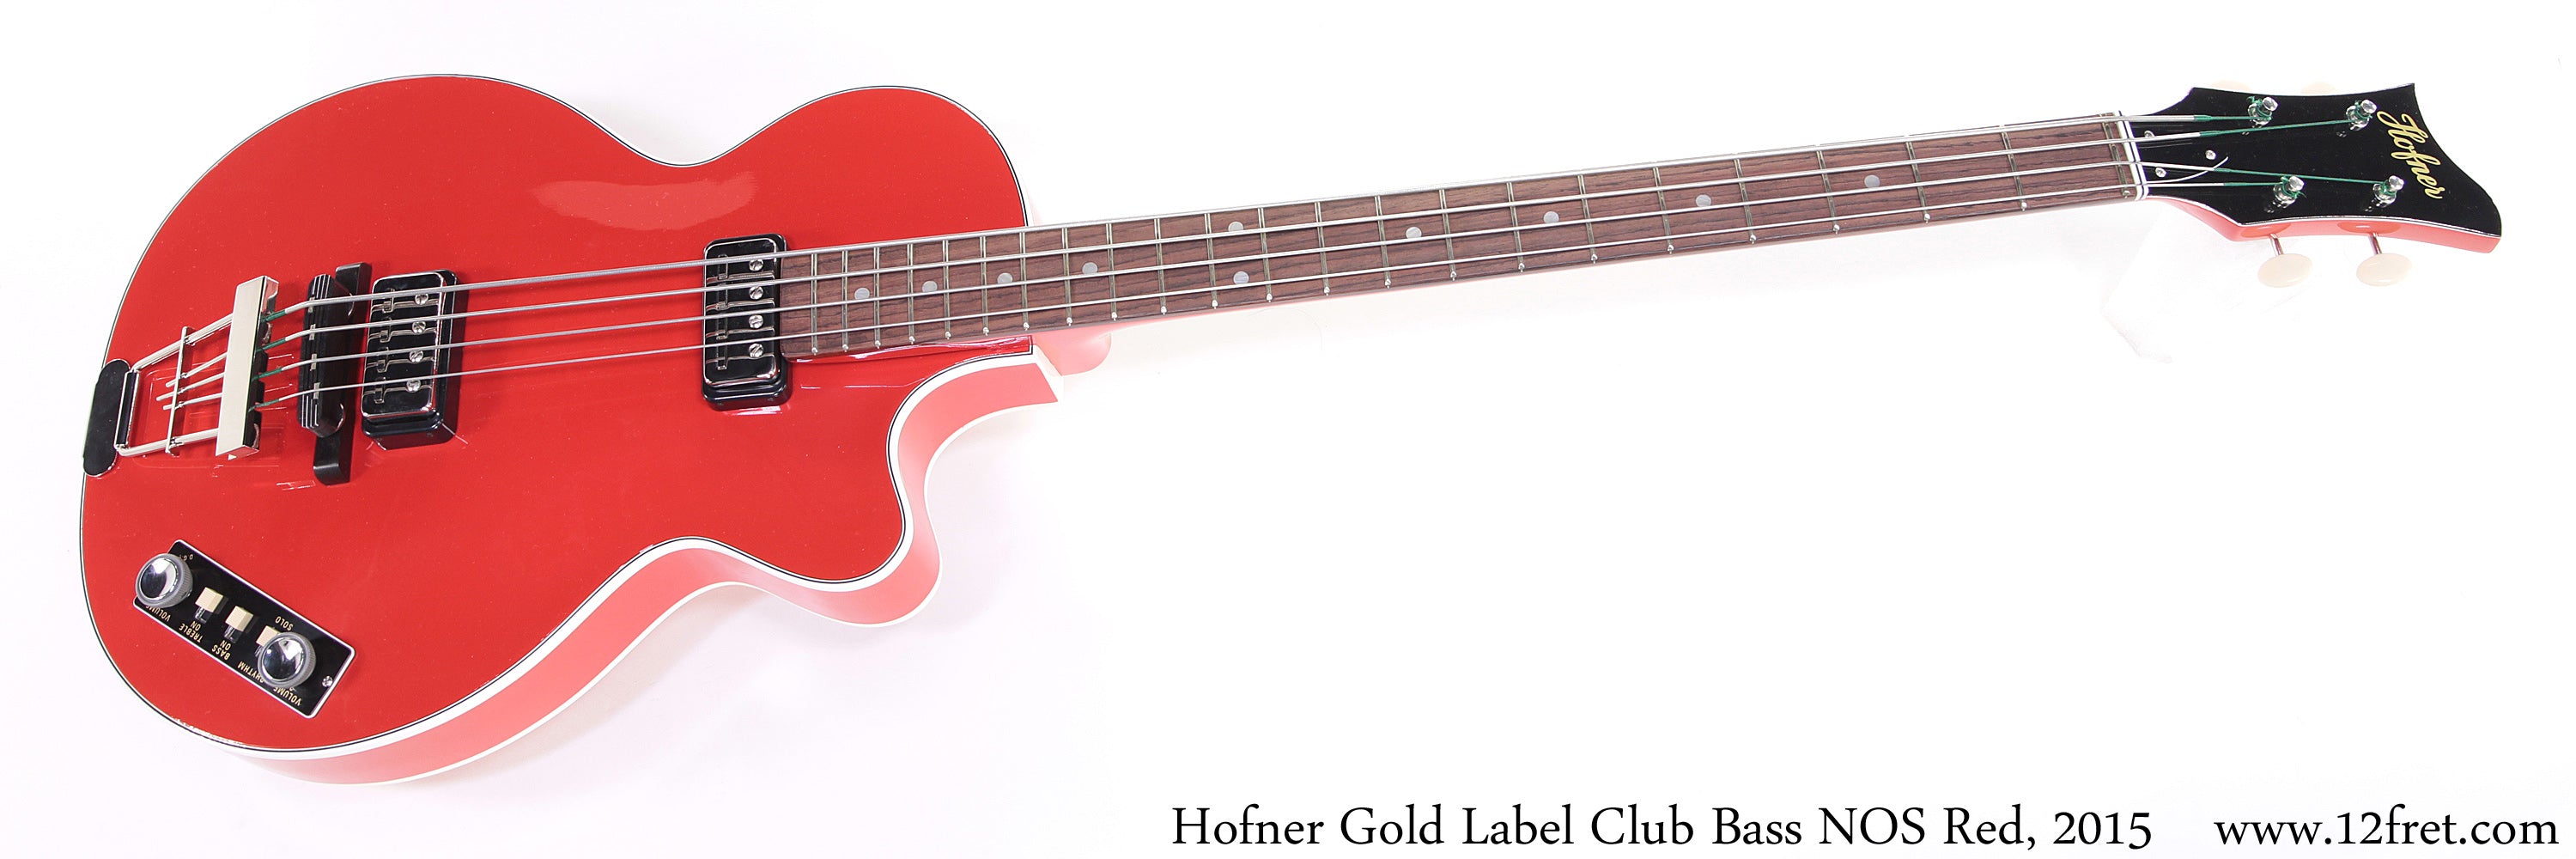 Hofner Gold Label Club Bass NOS Red, 2015 - The Twelfth Fret